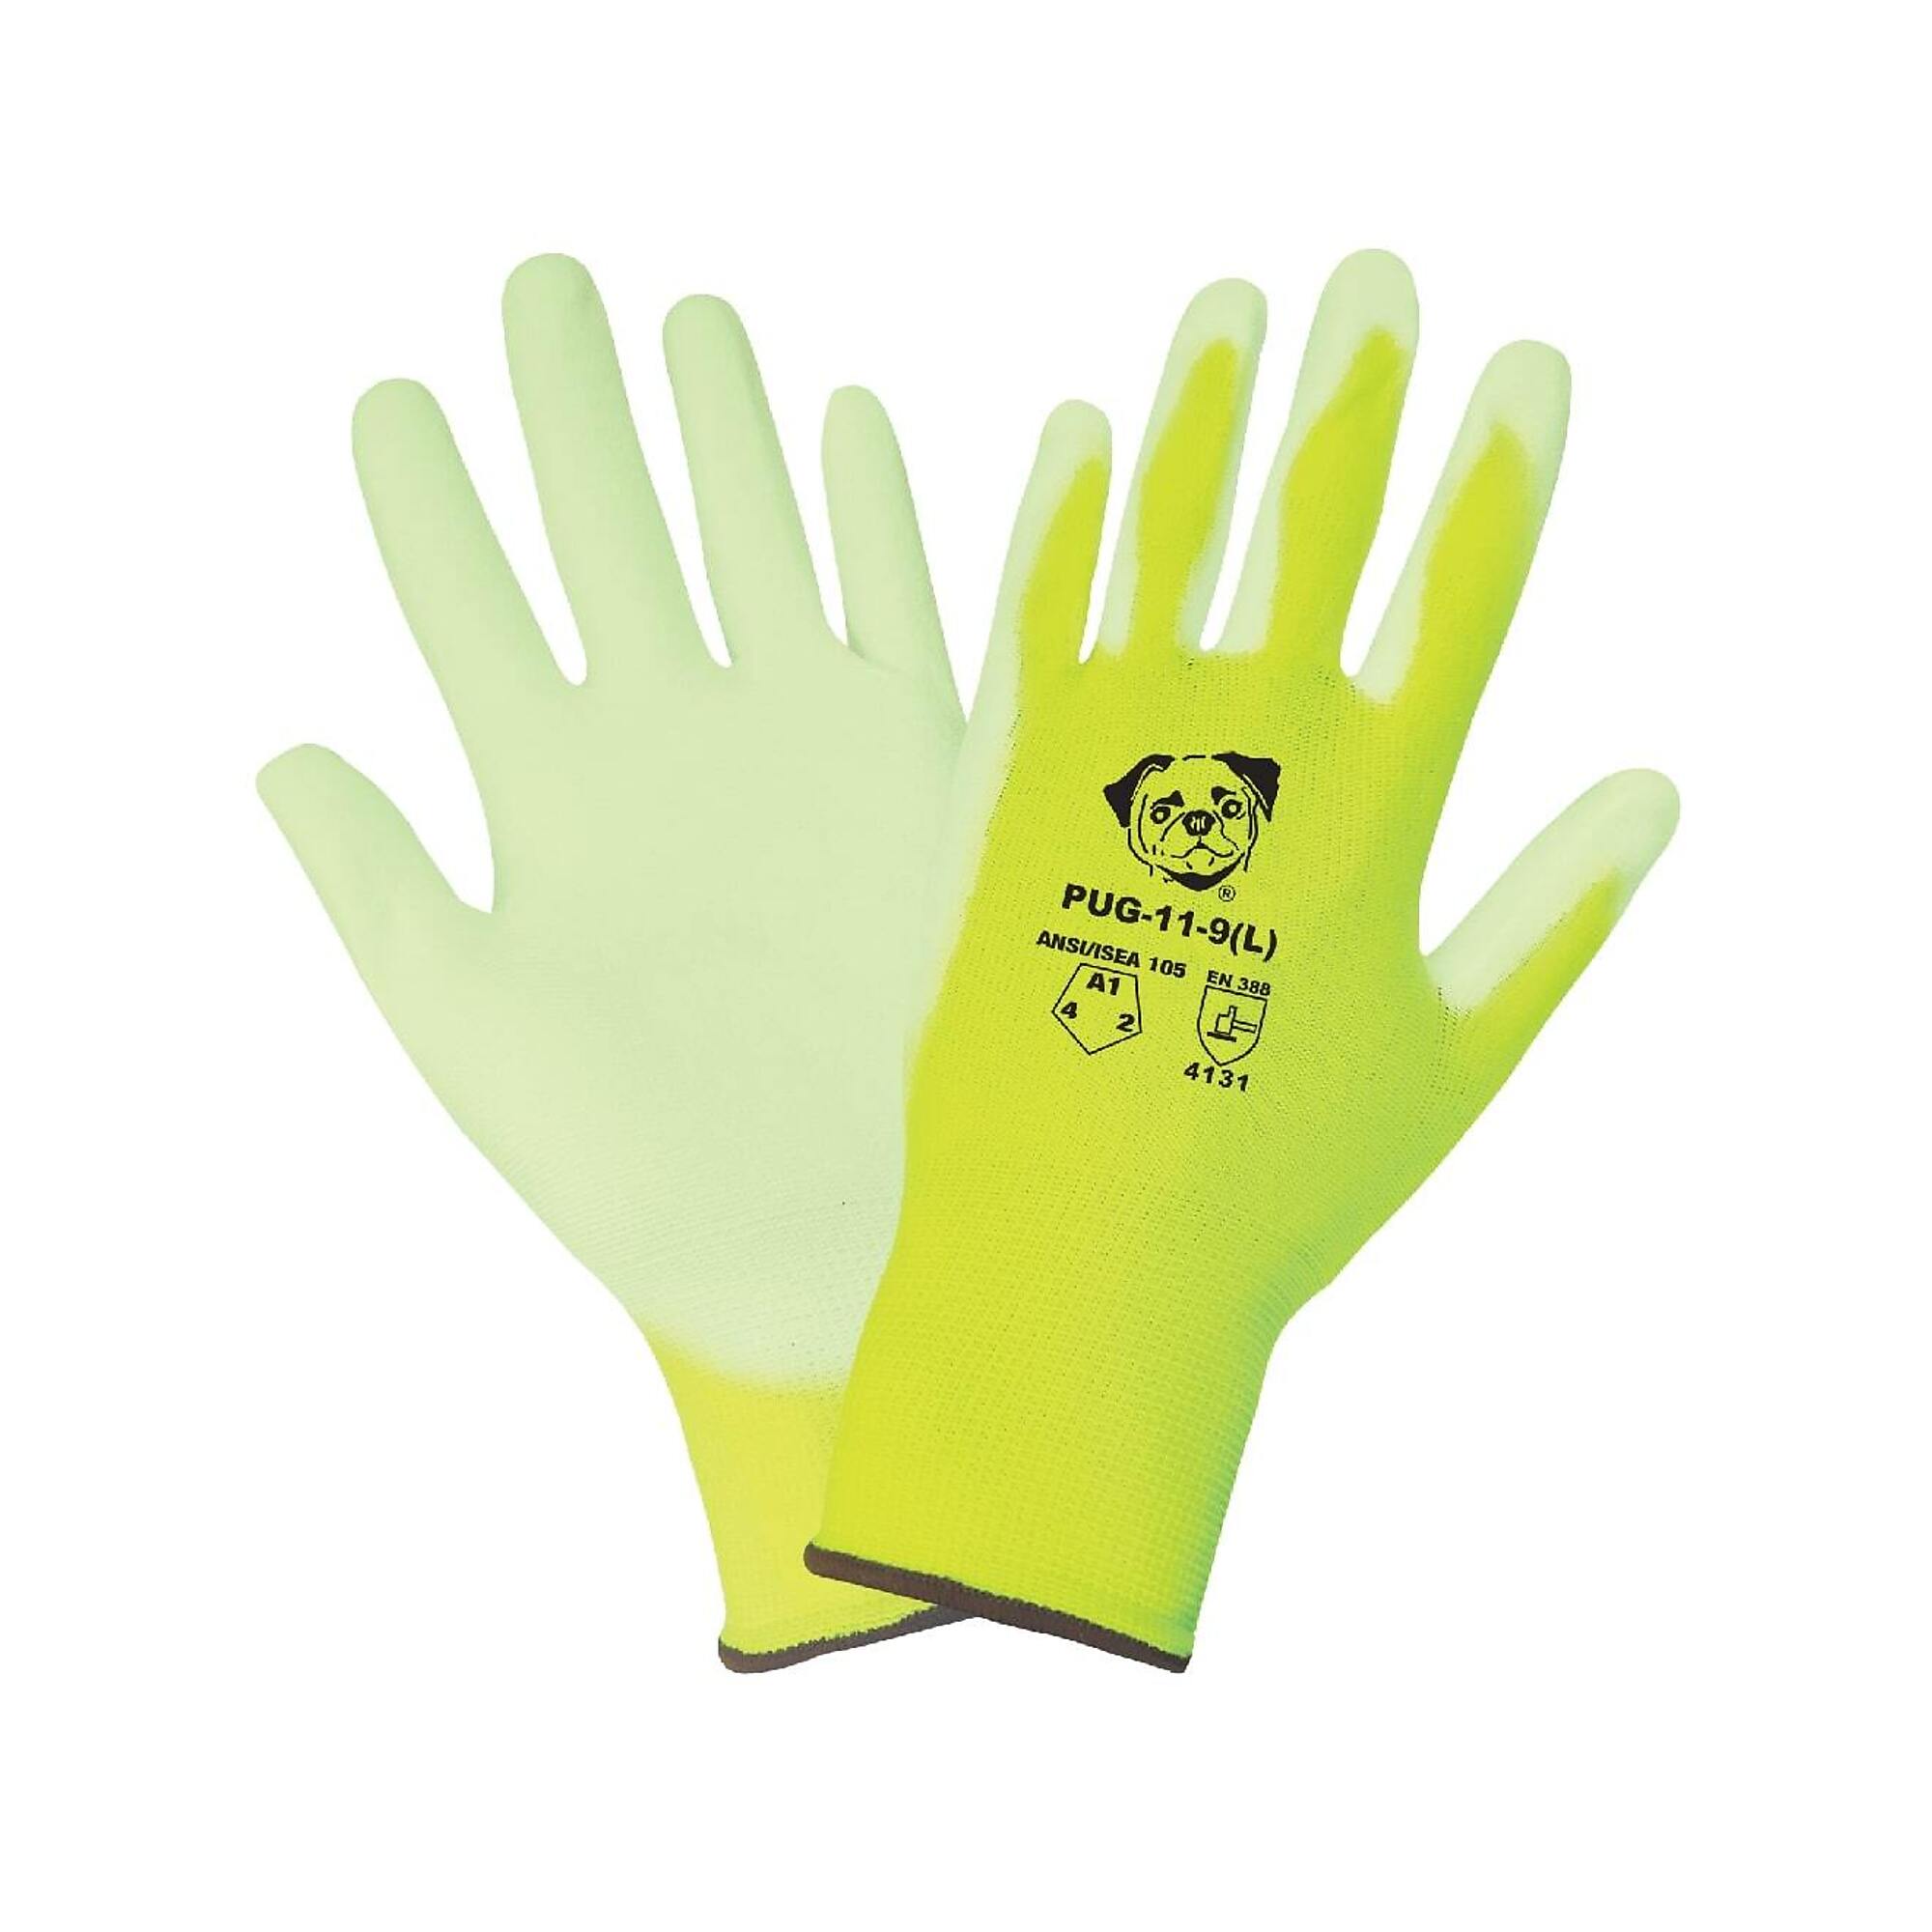 Global Glove PUG , HV Y/G, Poly Coated, Cut Resistant A1 Gloves - 12 Pairs, Size L, Color High-Visibility Yellow/Green, Included (qty.) 12 Model PUG-